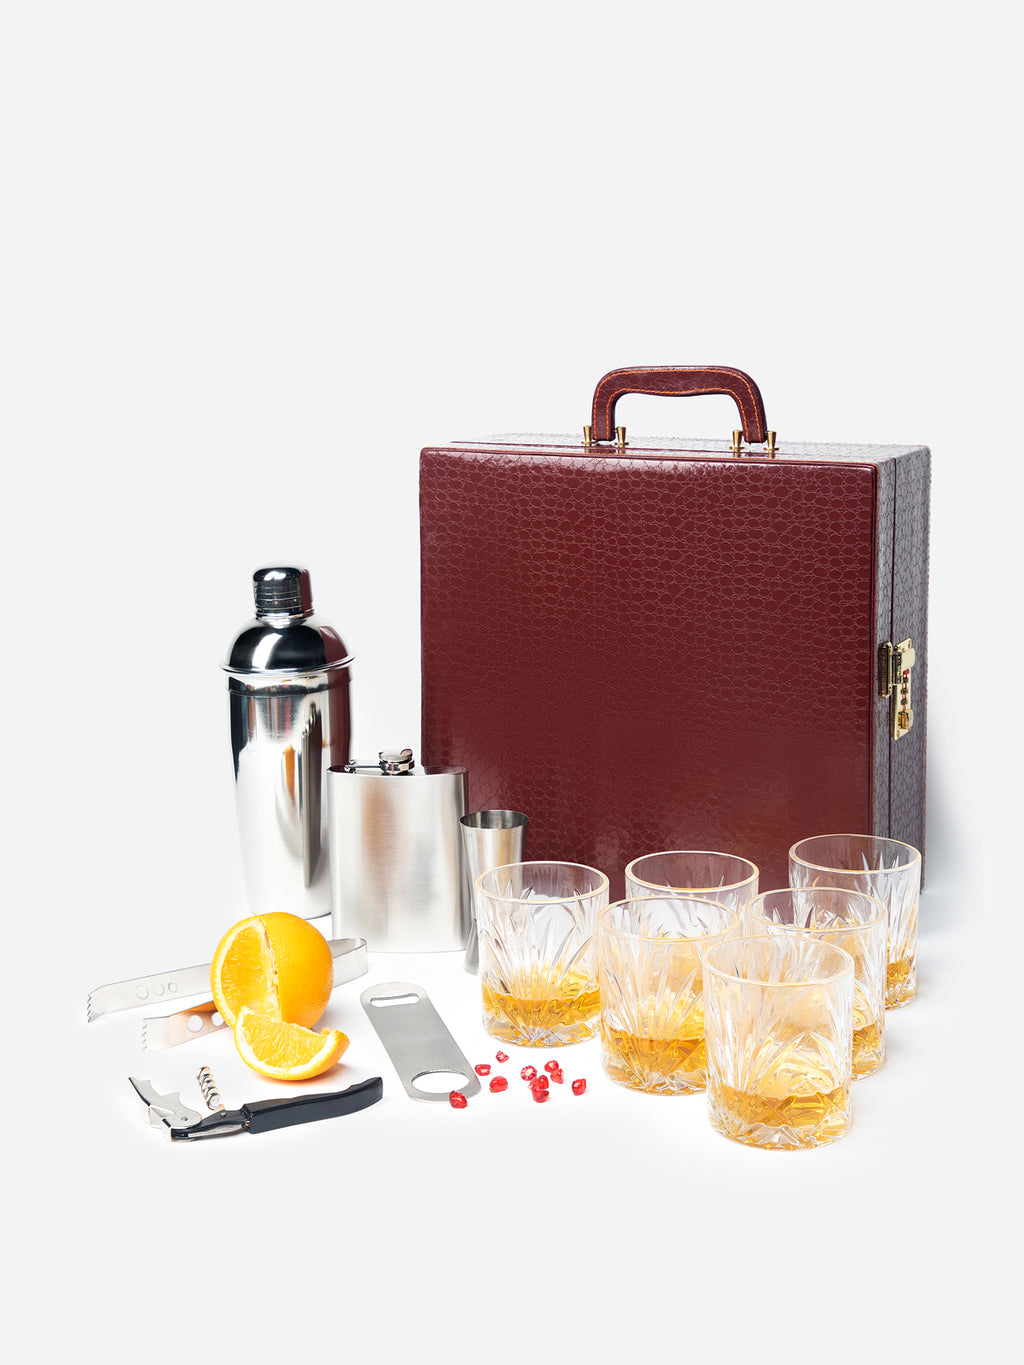 Anything & Everything Croc Print Premium Bar Set with 6 Whiskey Glasses & Accessories | Portable Leatherette Bar Set (Red Wine)